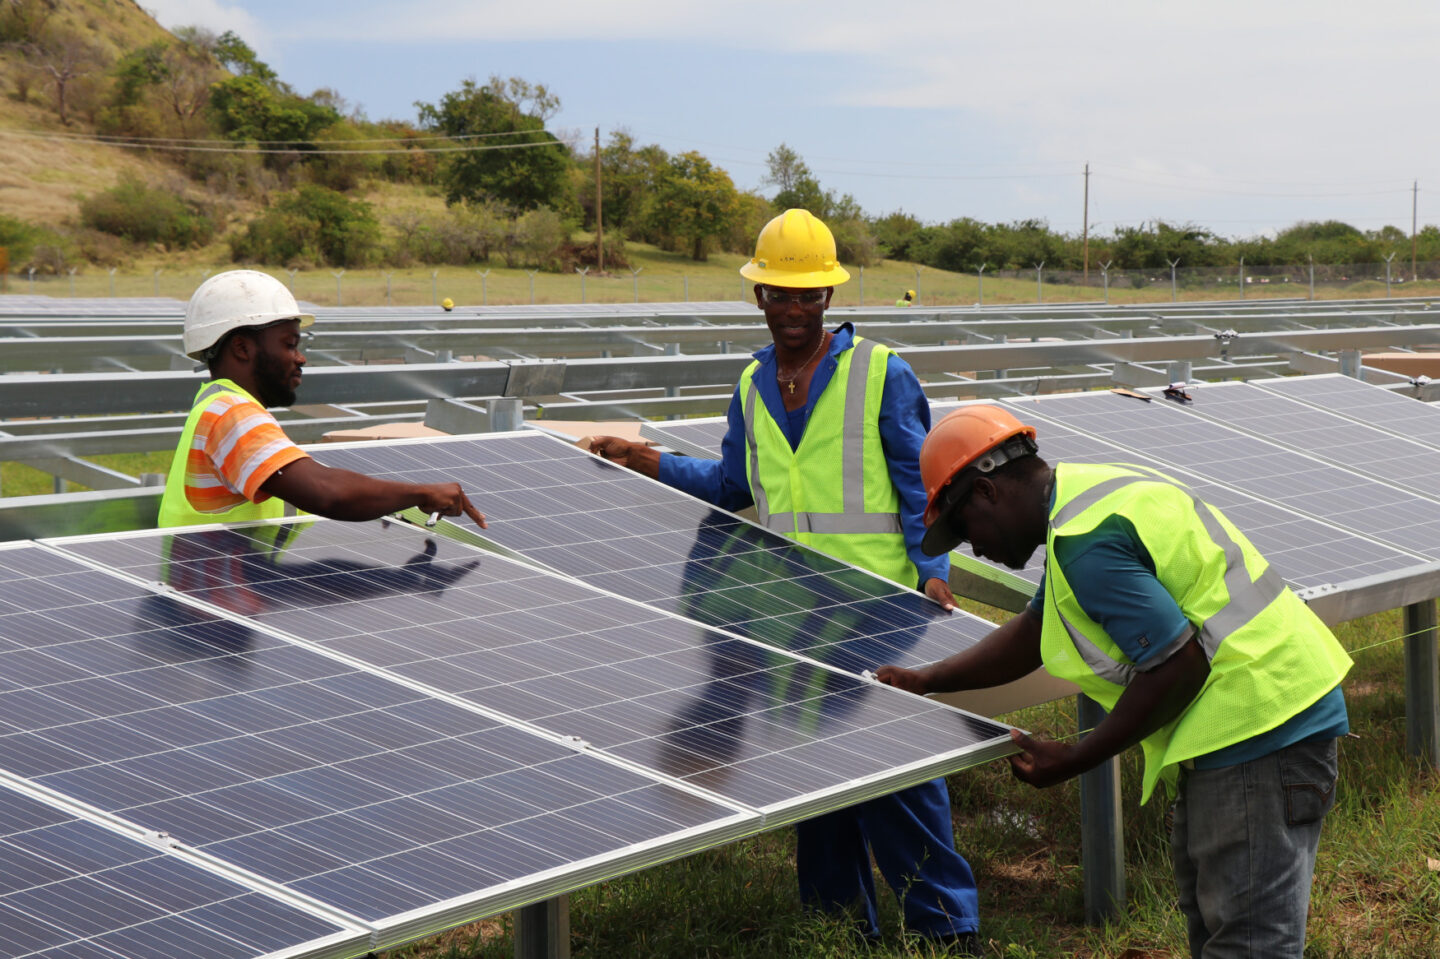 Workers install a solar panel at a solar farm in St. Lucia